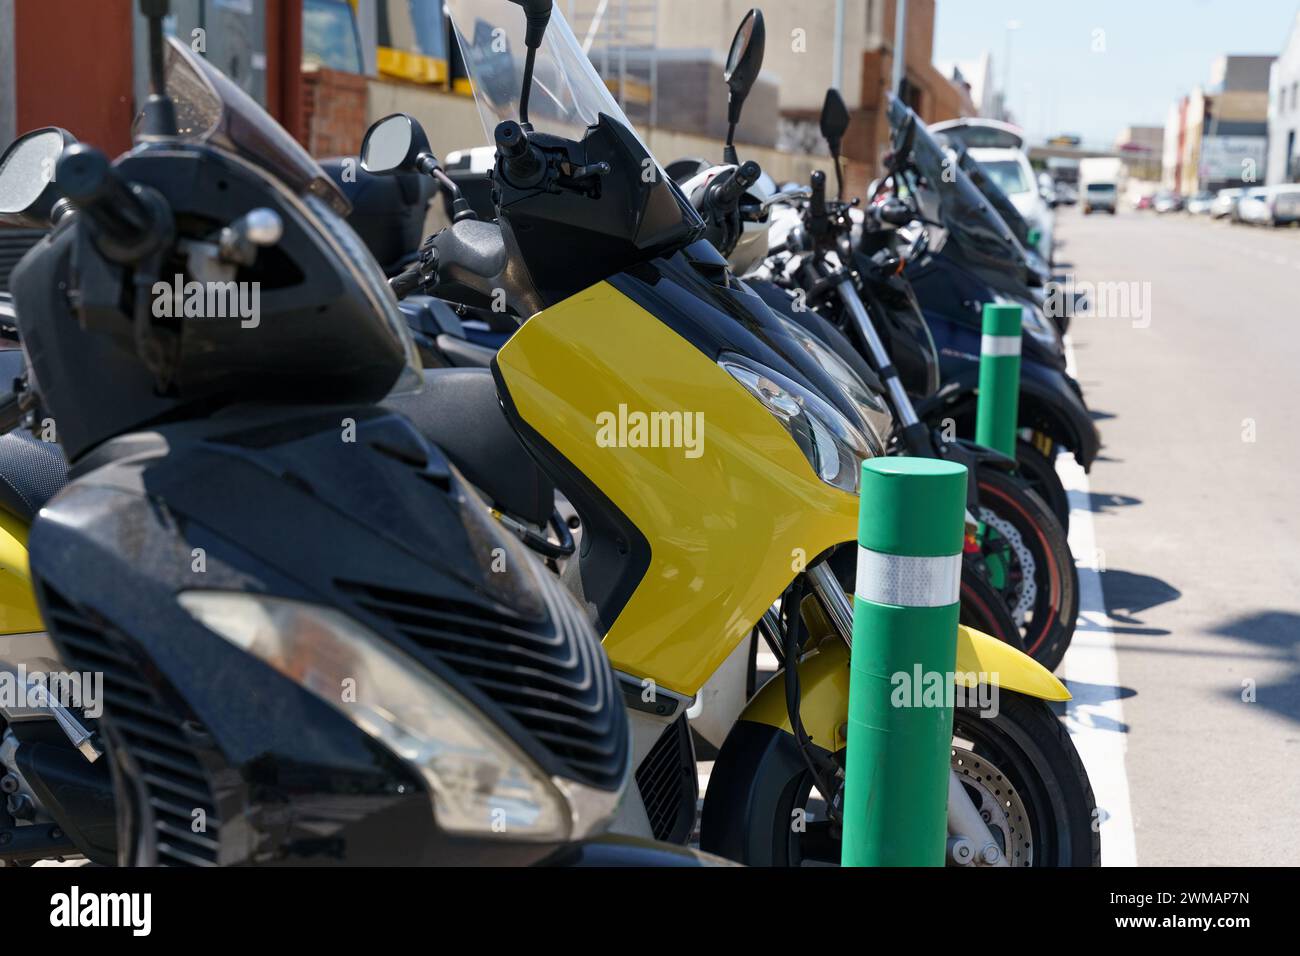 A row of motorcycles neatly lined up next to each other in a parking lot. Each bike is standing upright, showing off its unique design and details. Th Stock Photo